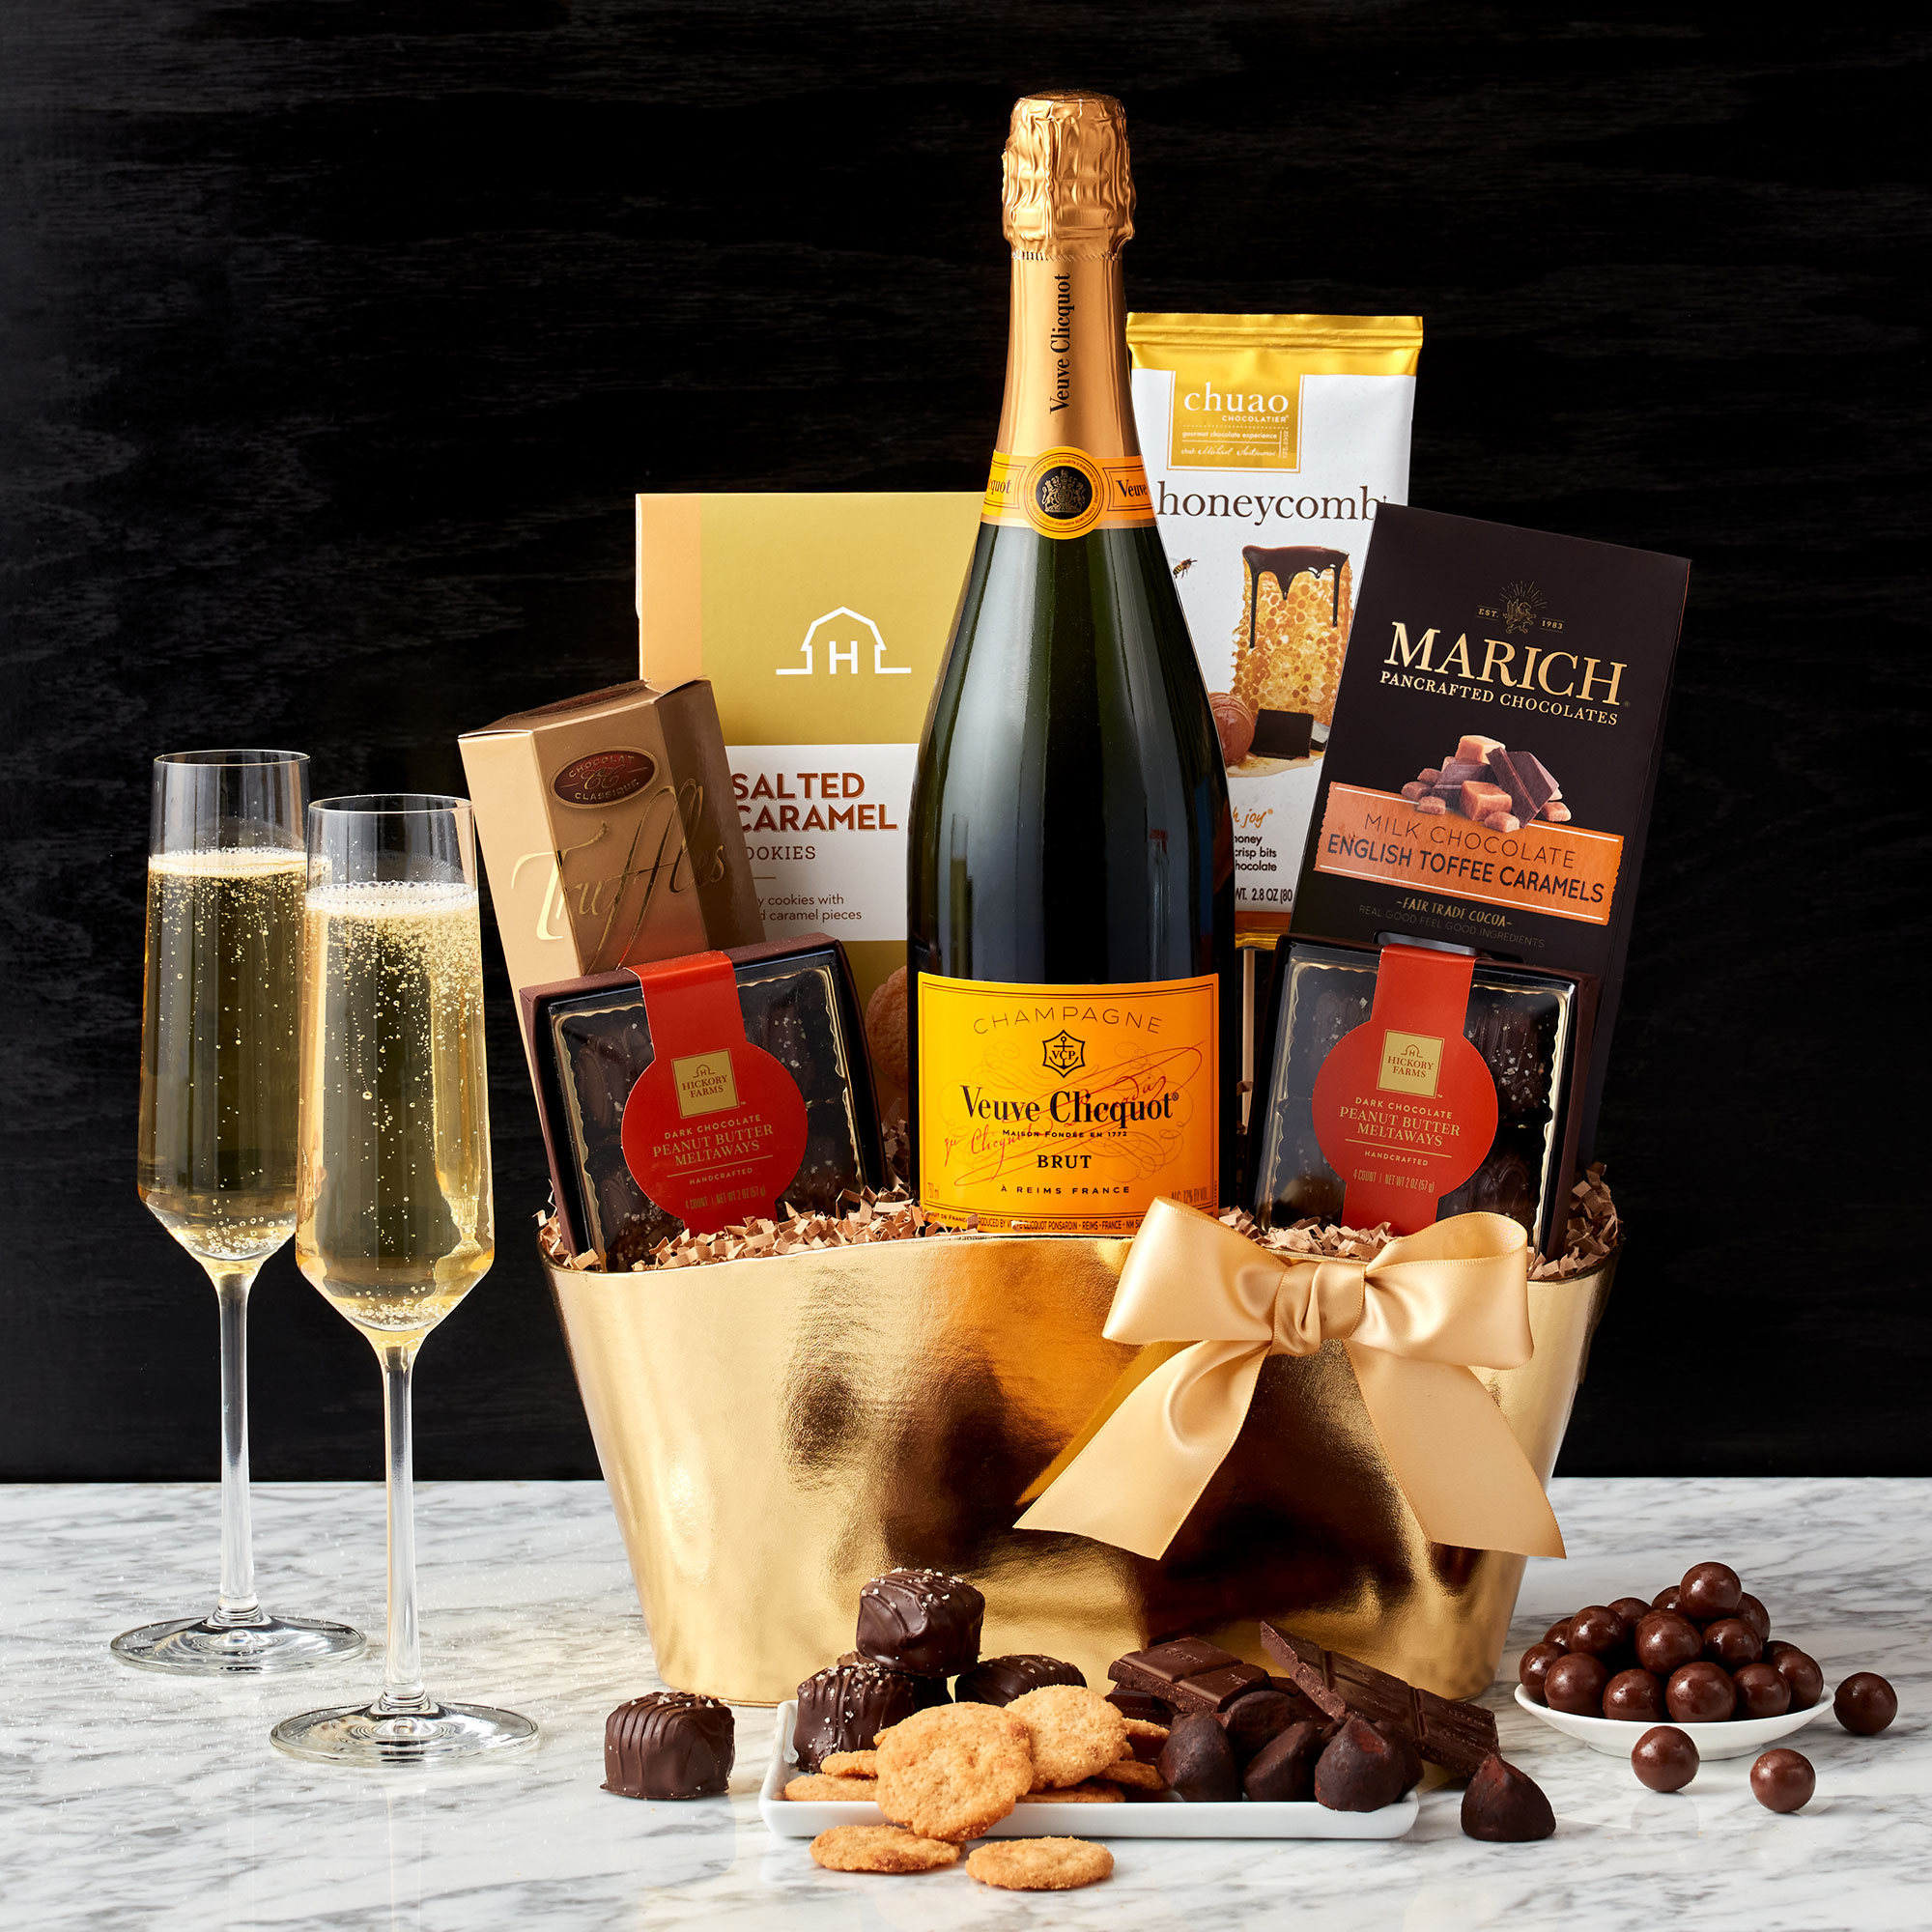 Veuve Clicquot Champagne Gift Basket - 195.00 USD | Hickory Farms